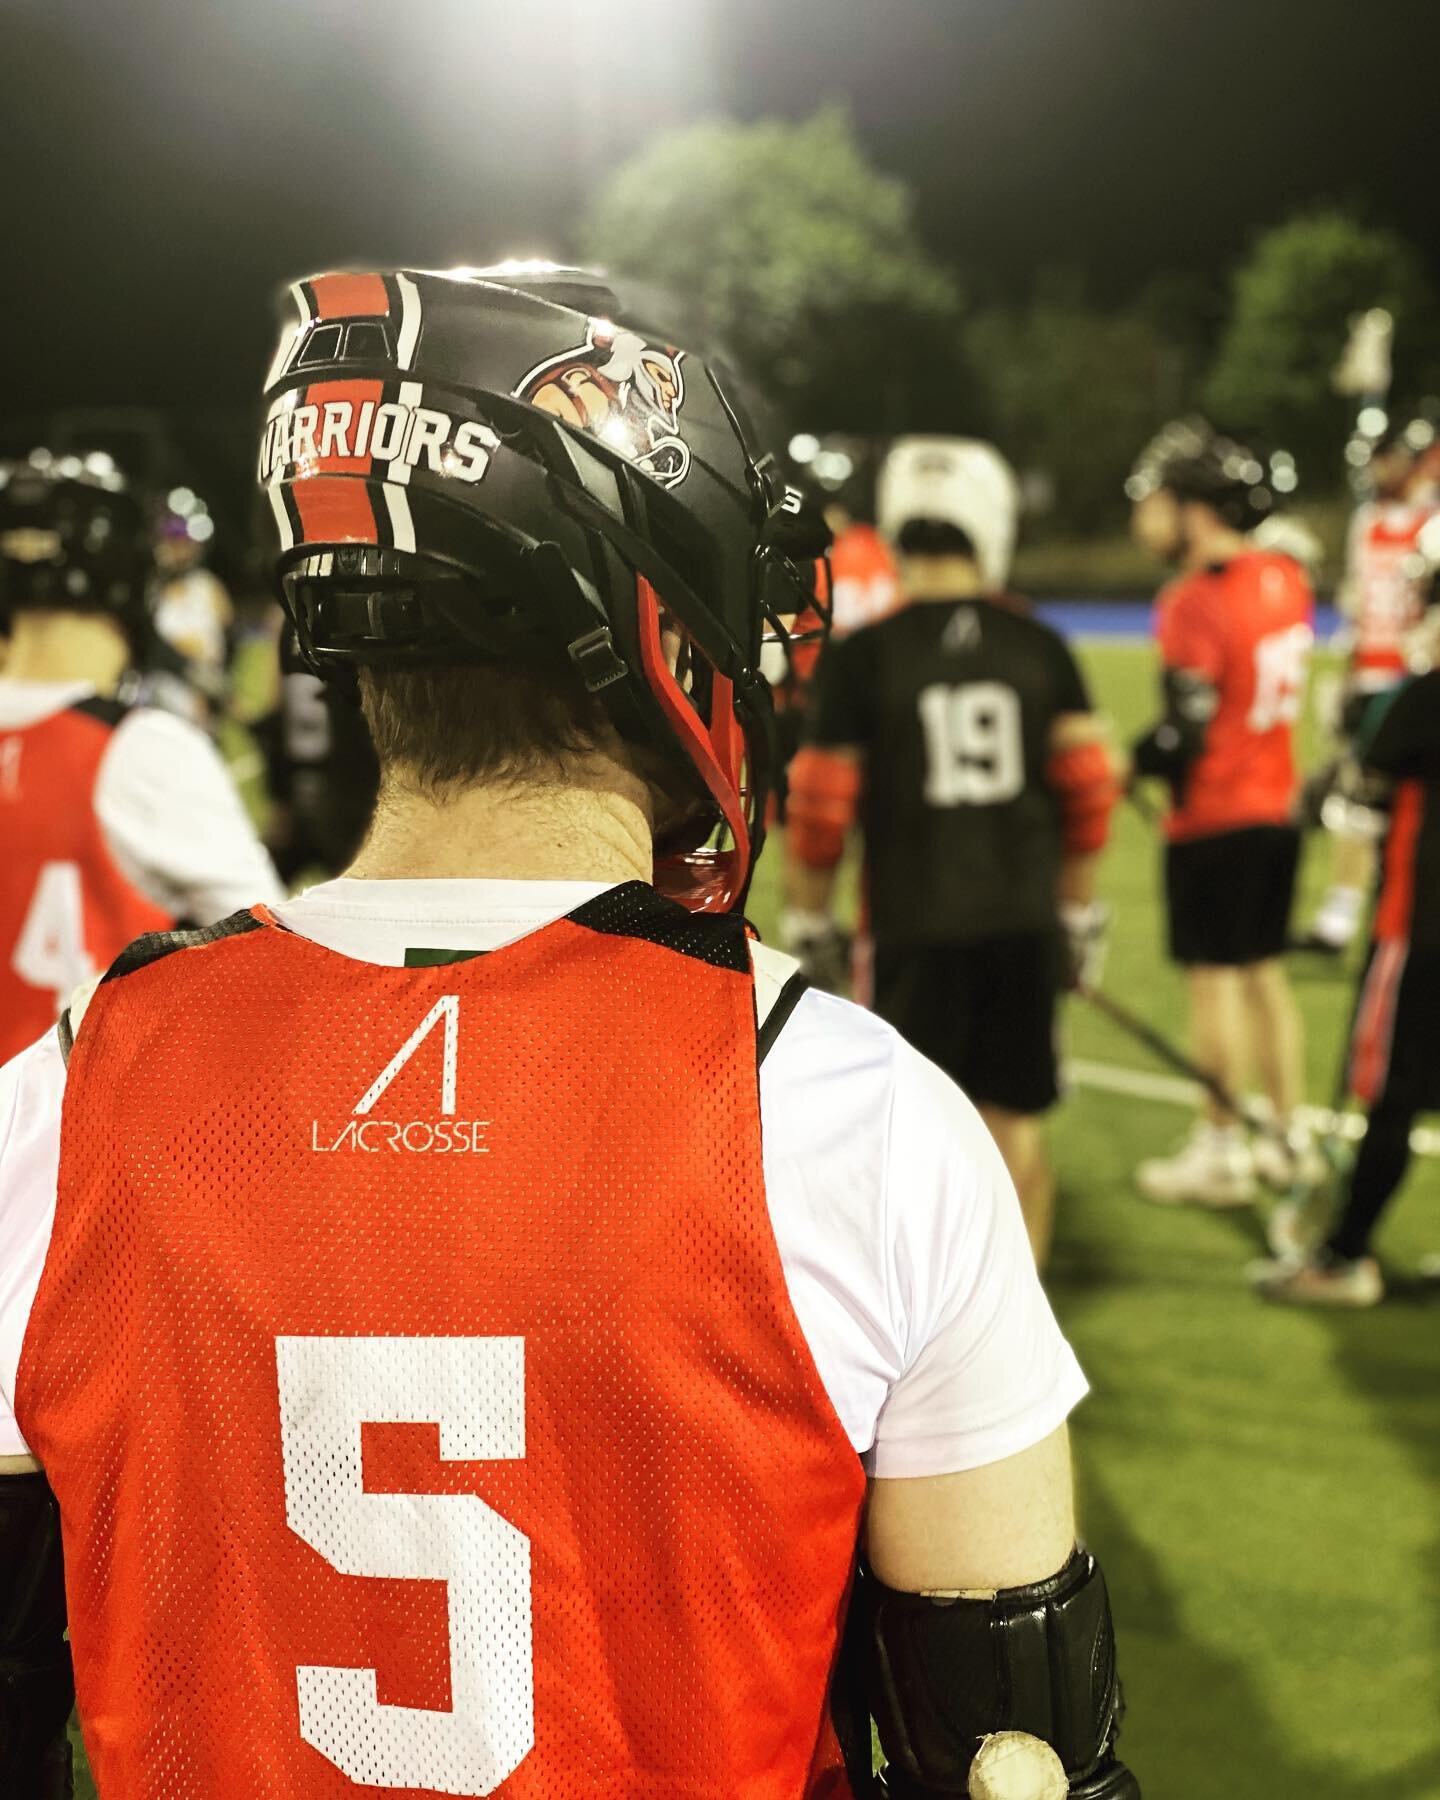 Join us for training Tuesday evenings at the Hertfordshire Sports Village astroturf from 7. New players always welcome! #lacrosse #WelwynLacrosse #Lax #WelwynLax #Warriors #WelwynWarriors